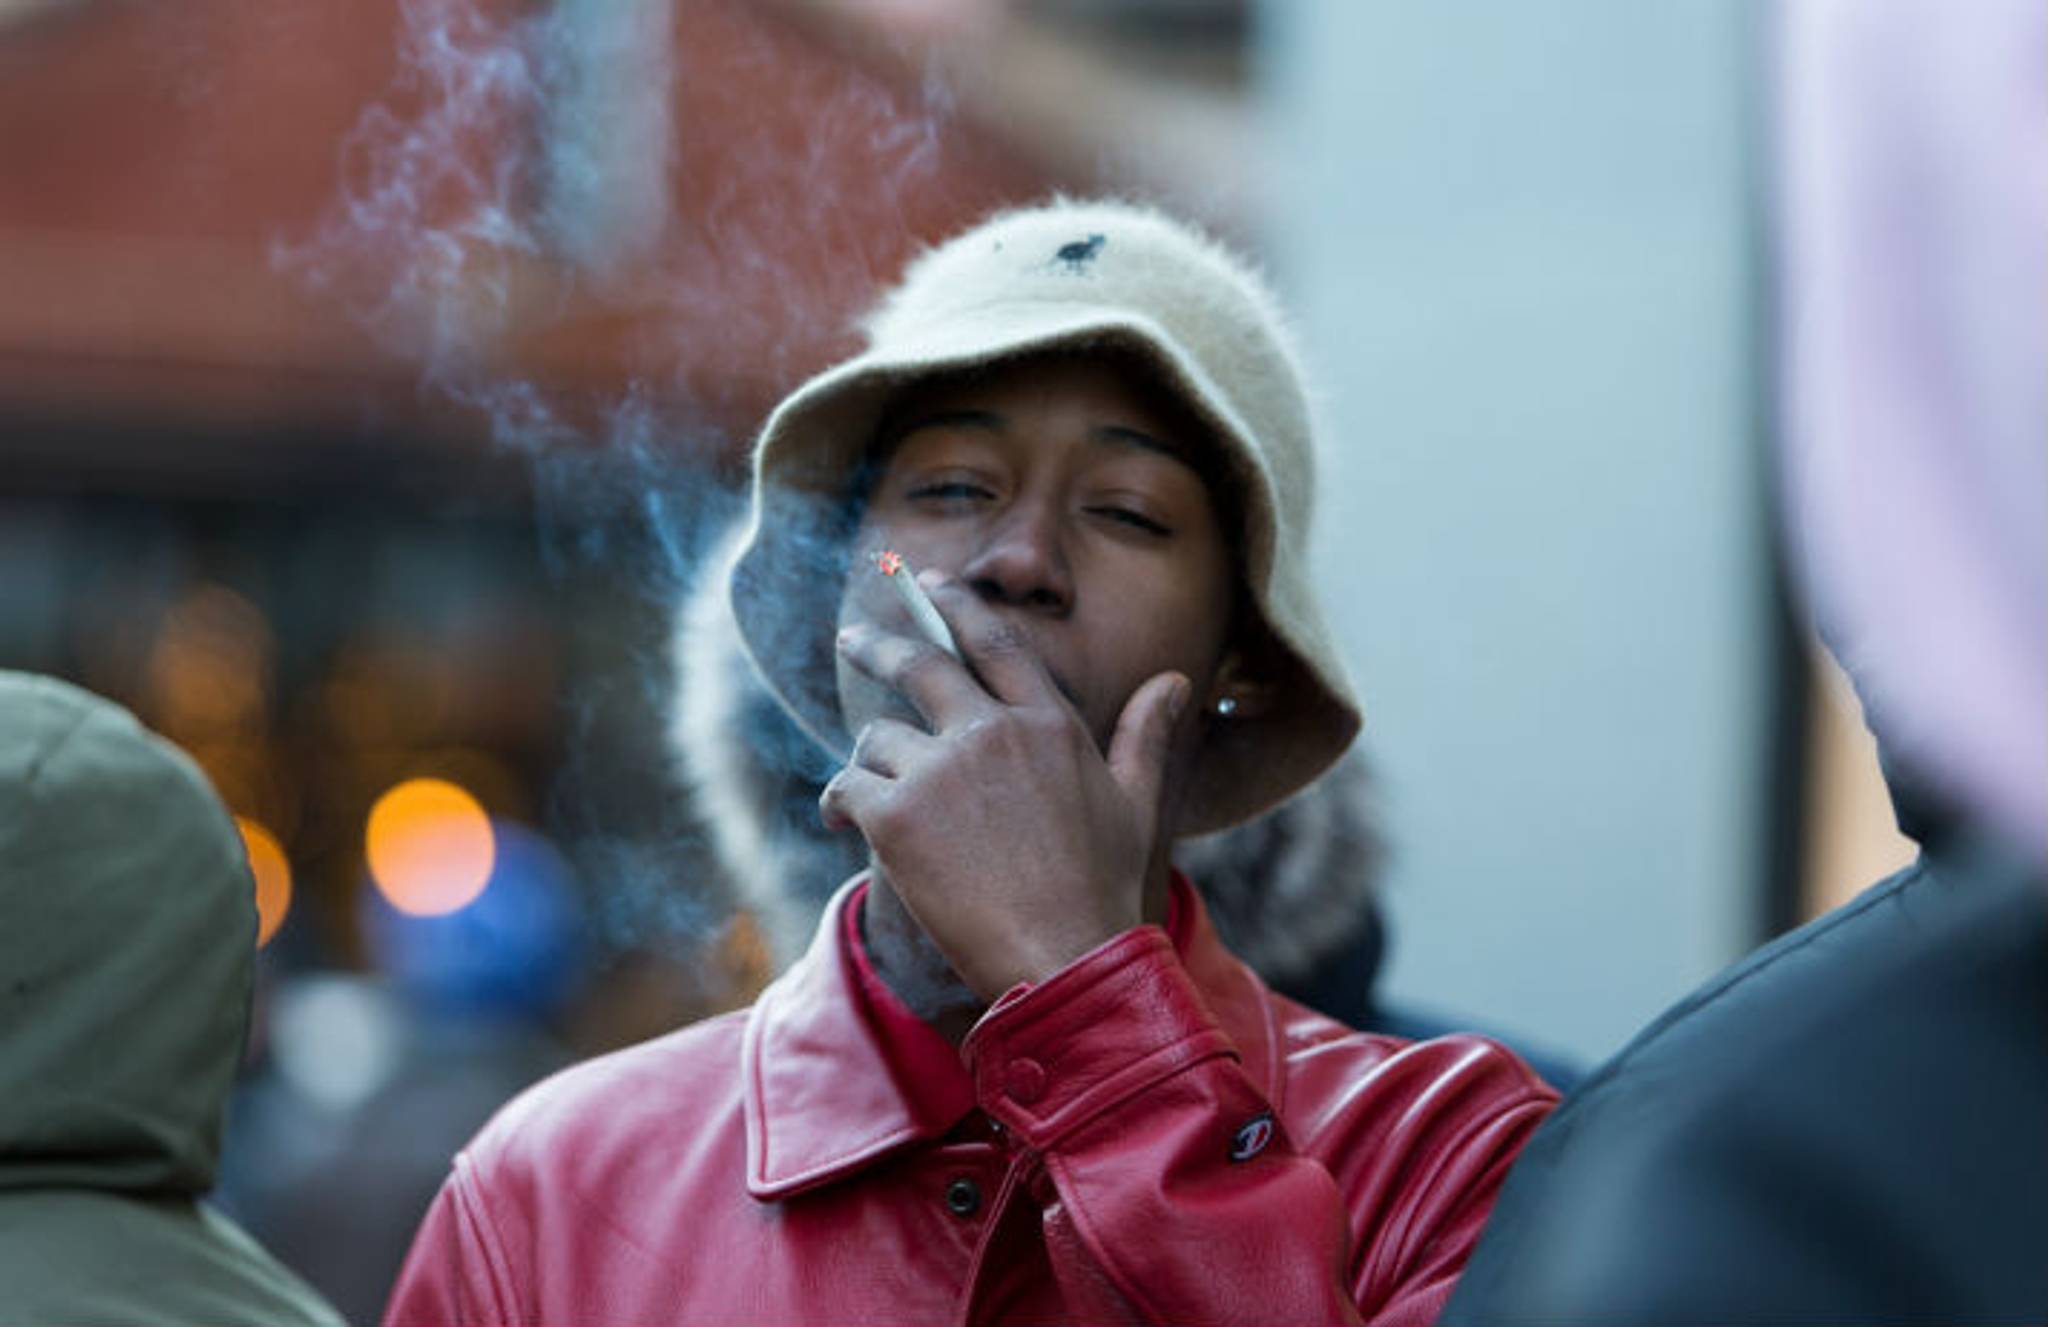 Smoking weed is losing its stigma for young Americans